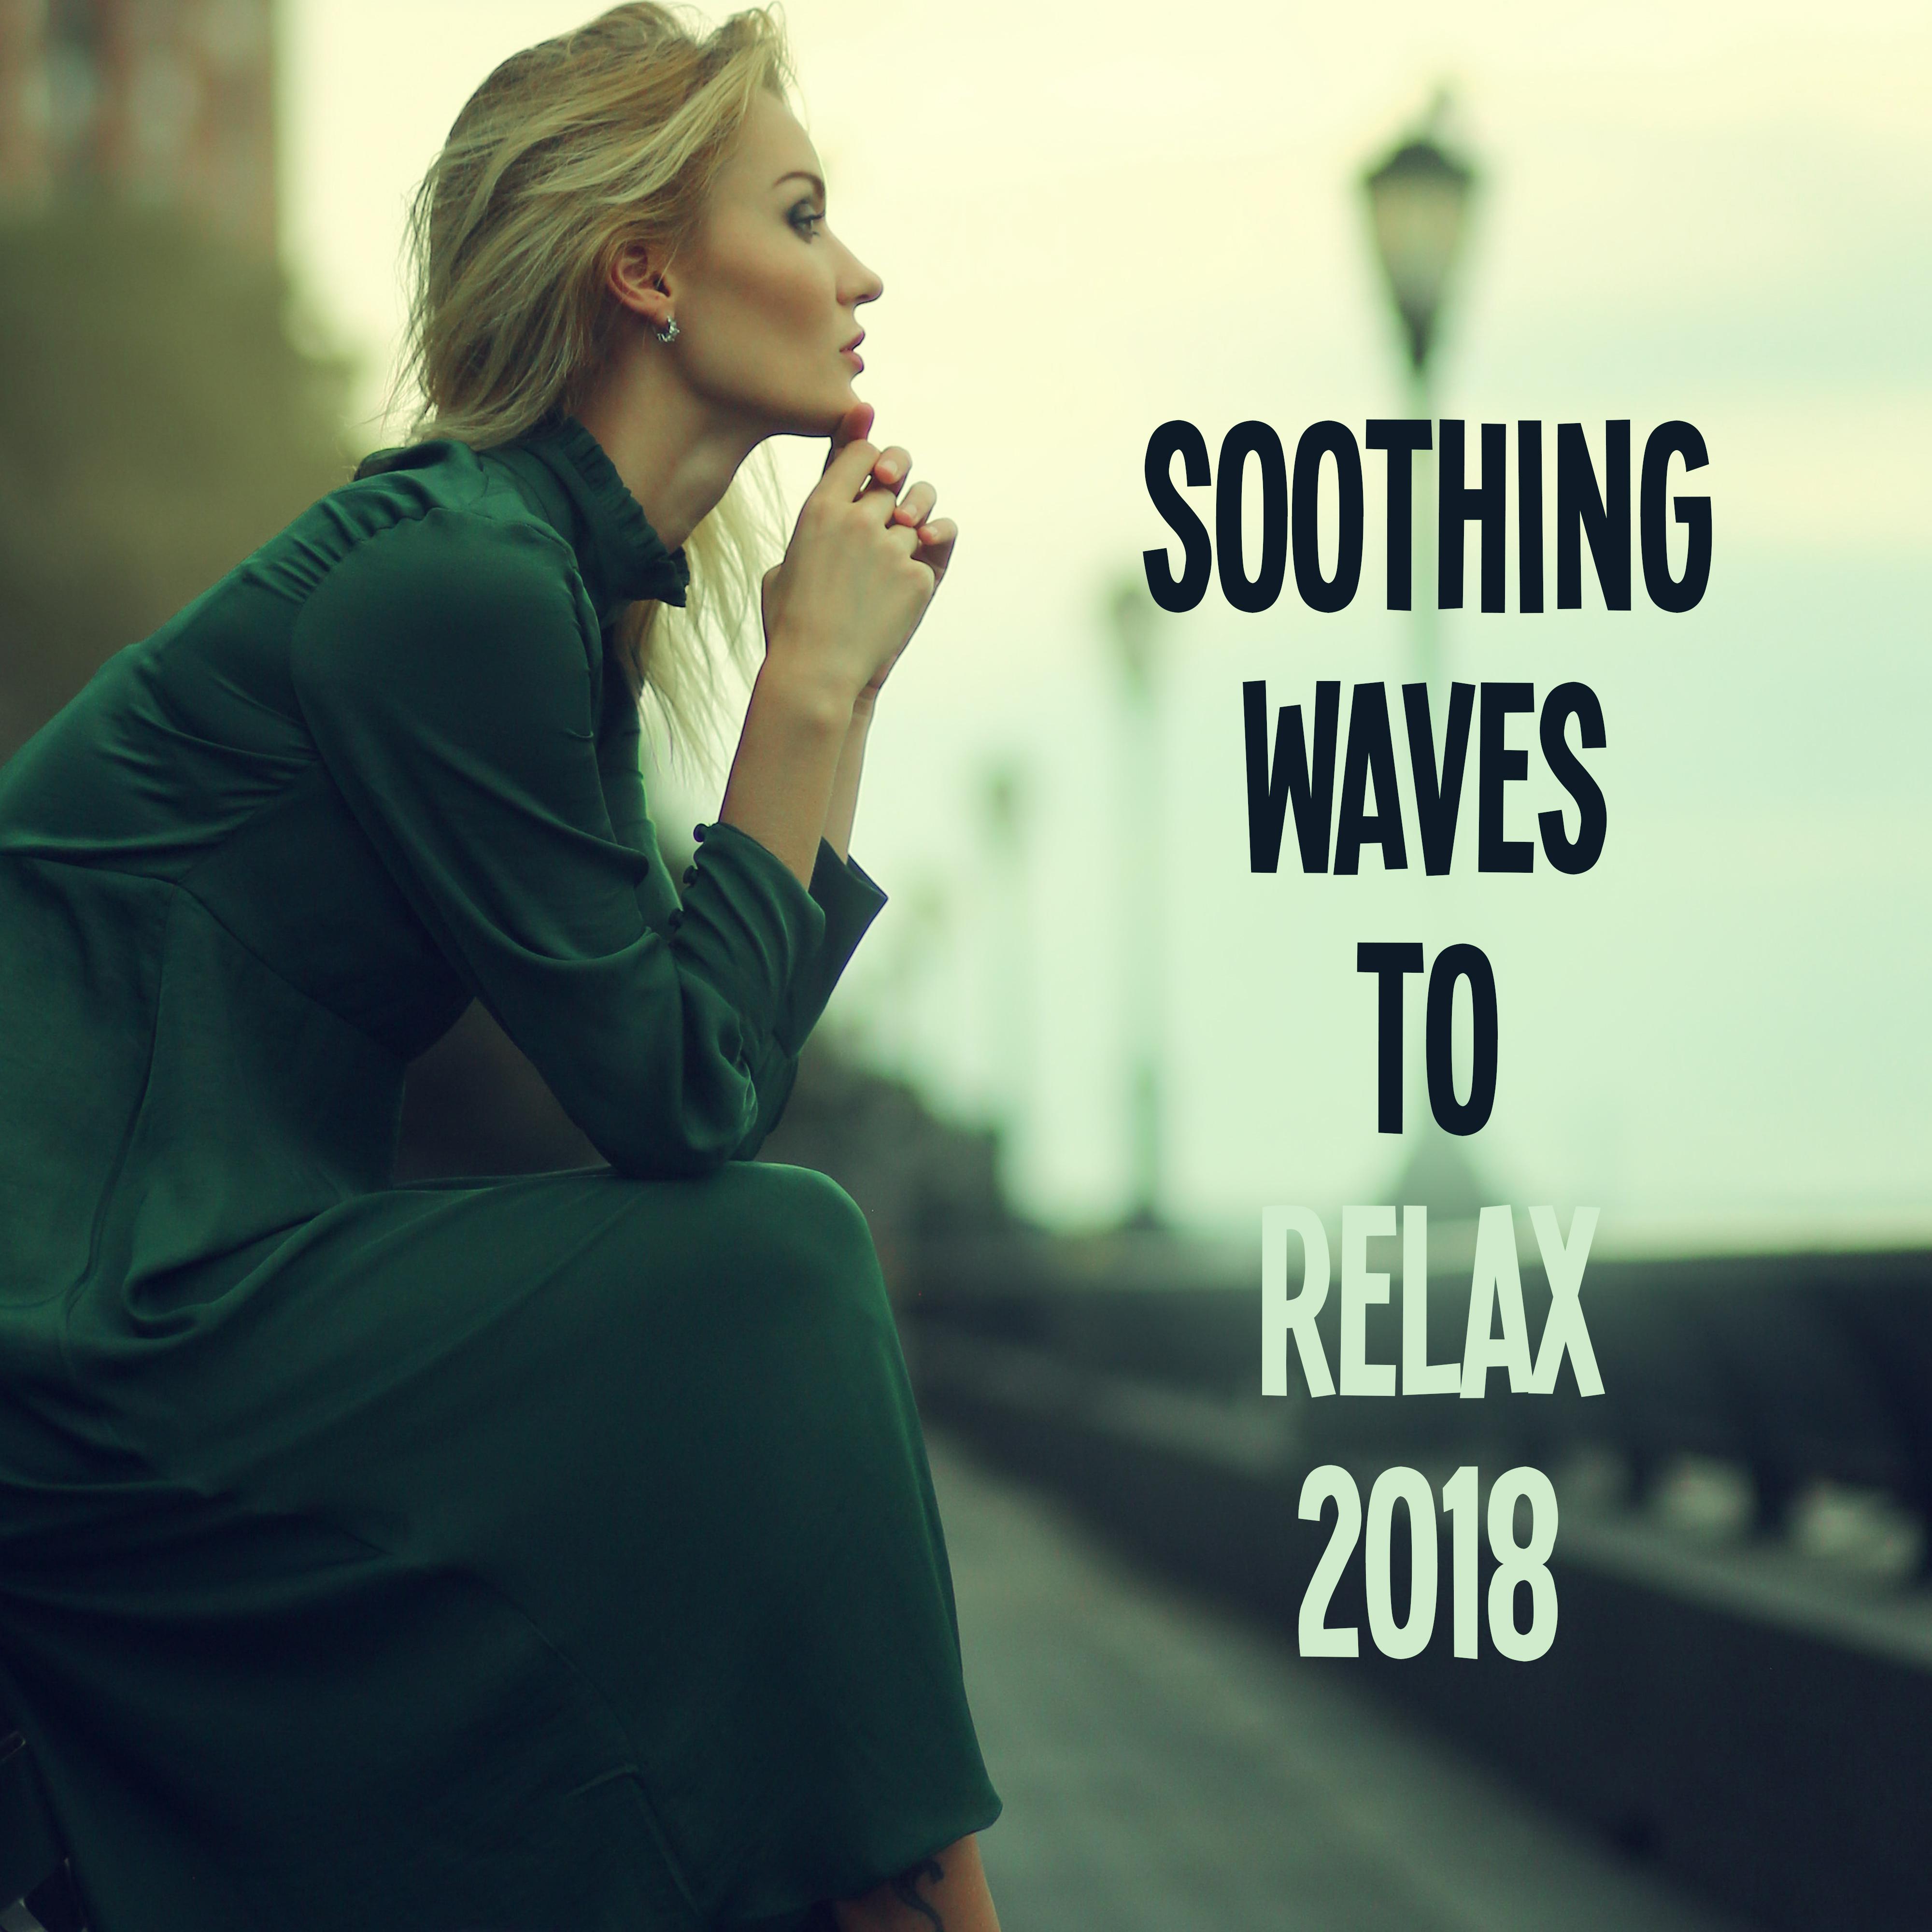 Soothing Waves to Relax 2018